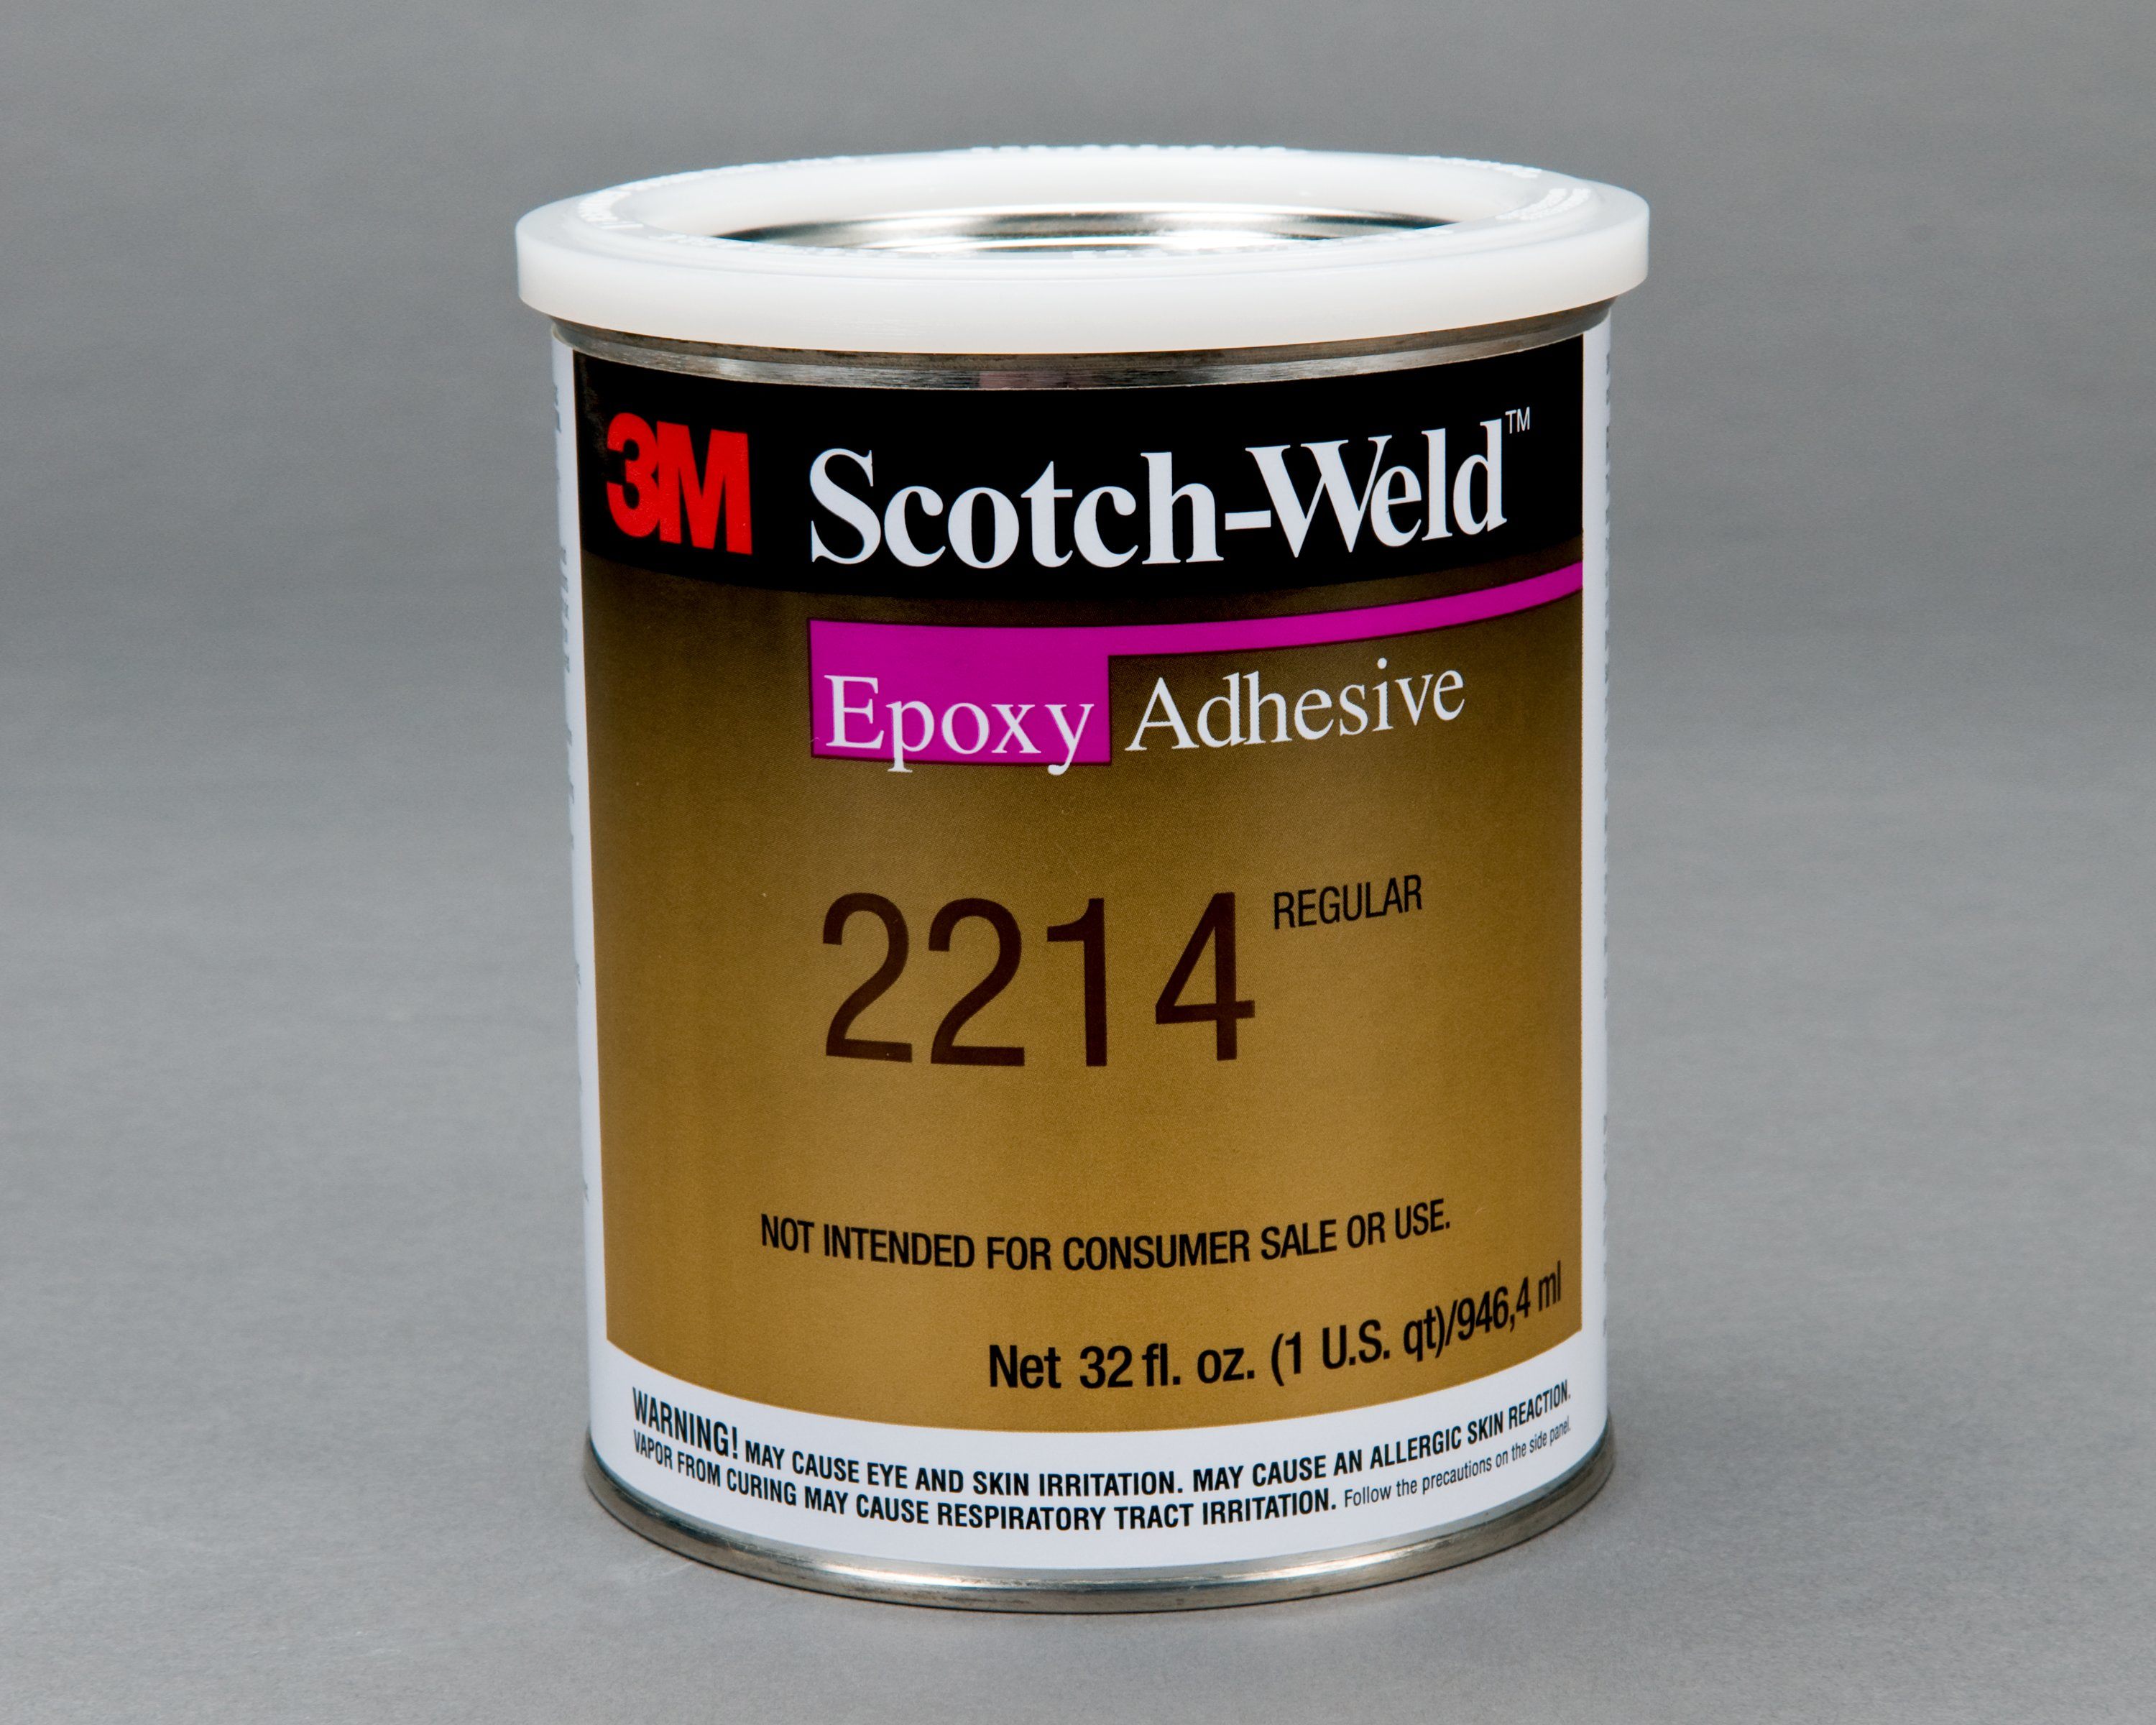 3M™ Scotch-Weld™ Epoxy Adhesive 2214 Non-Metallic Filled is designed for use in applications where high strength bonds are needed in a temperature range of -67°F to 250°F (-53°C to 121°C).